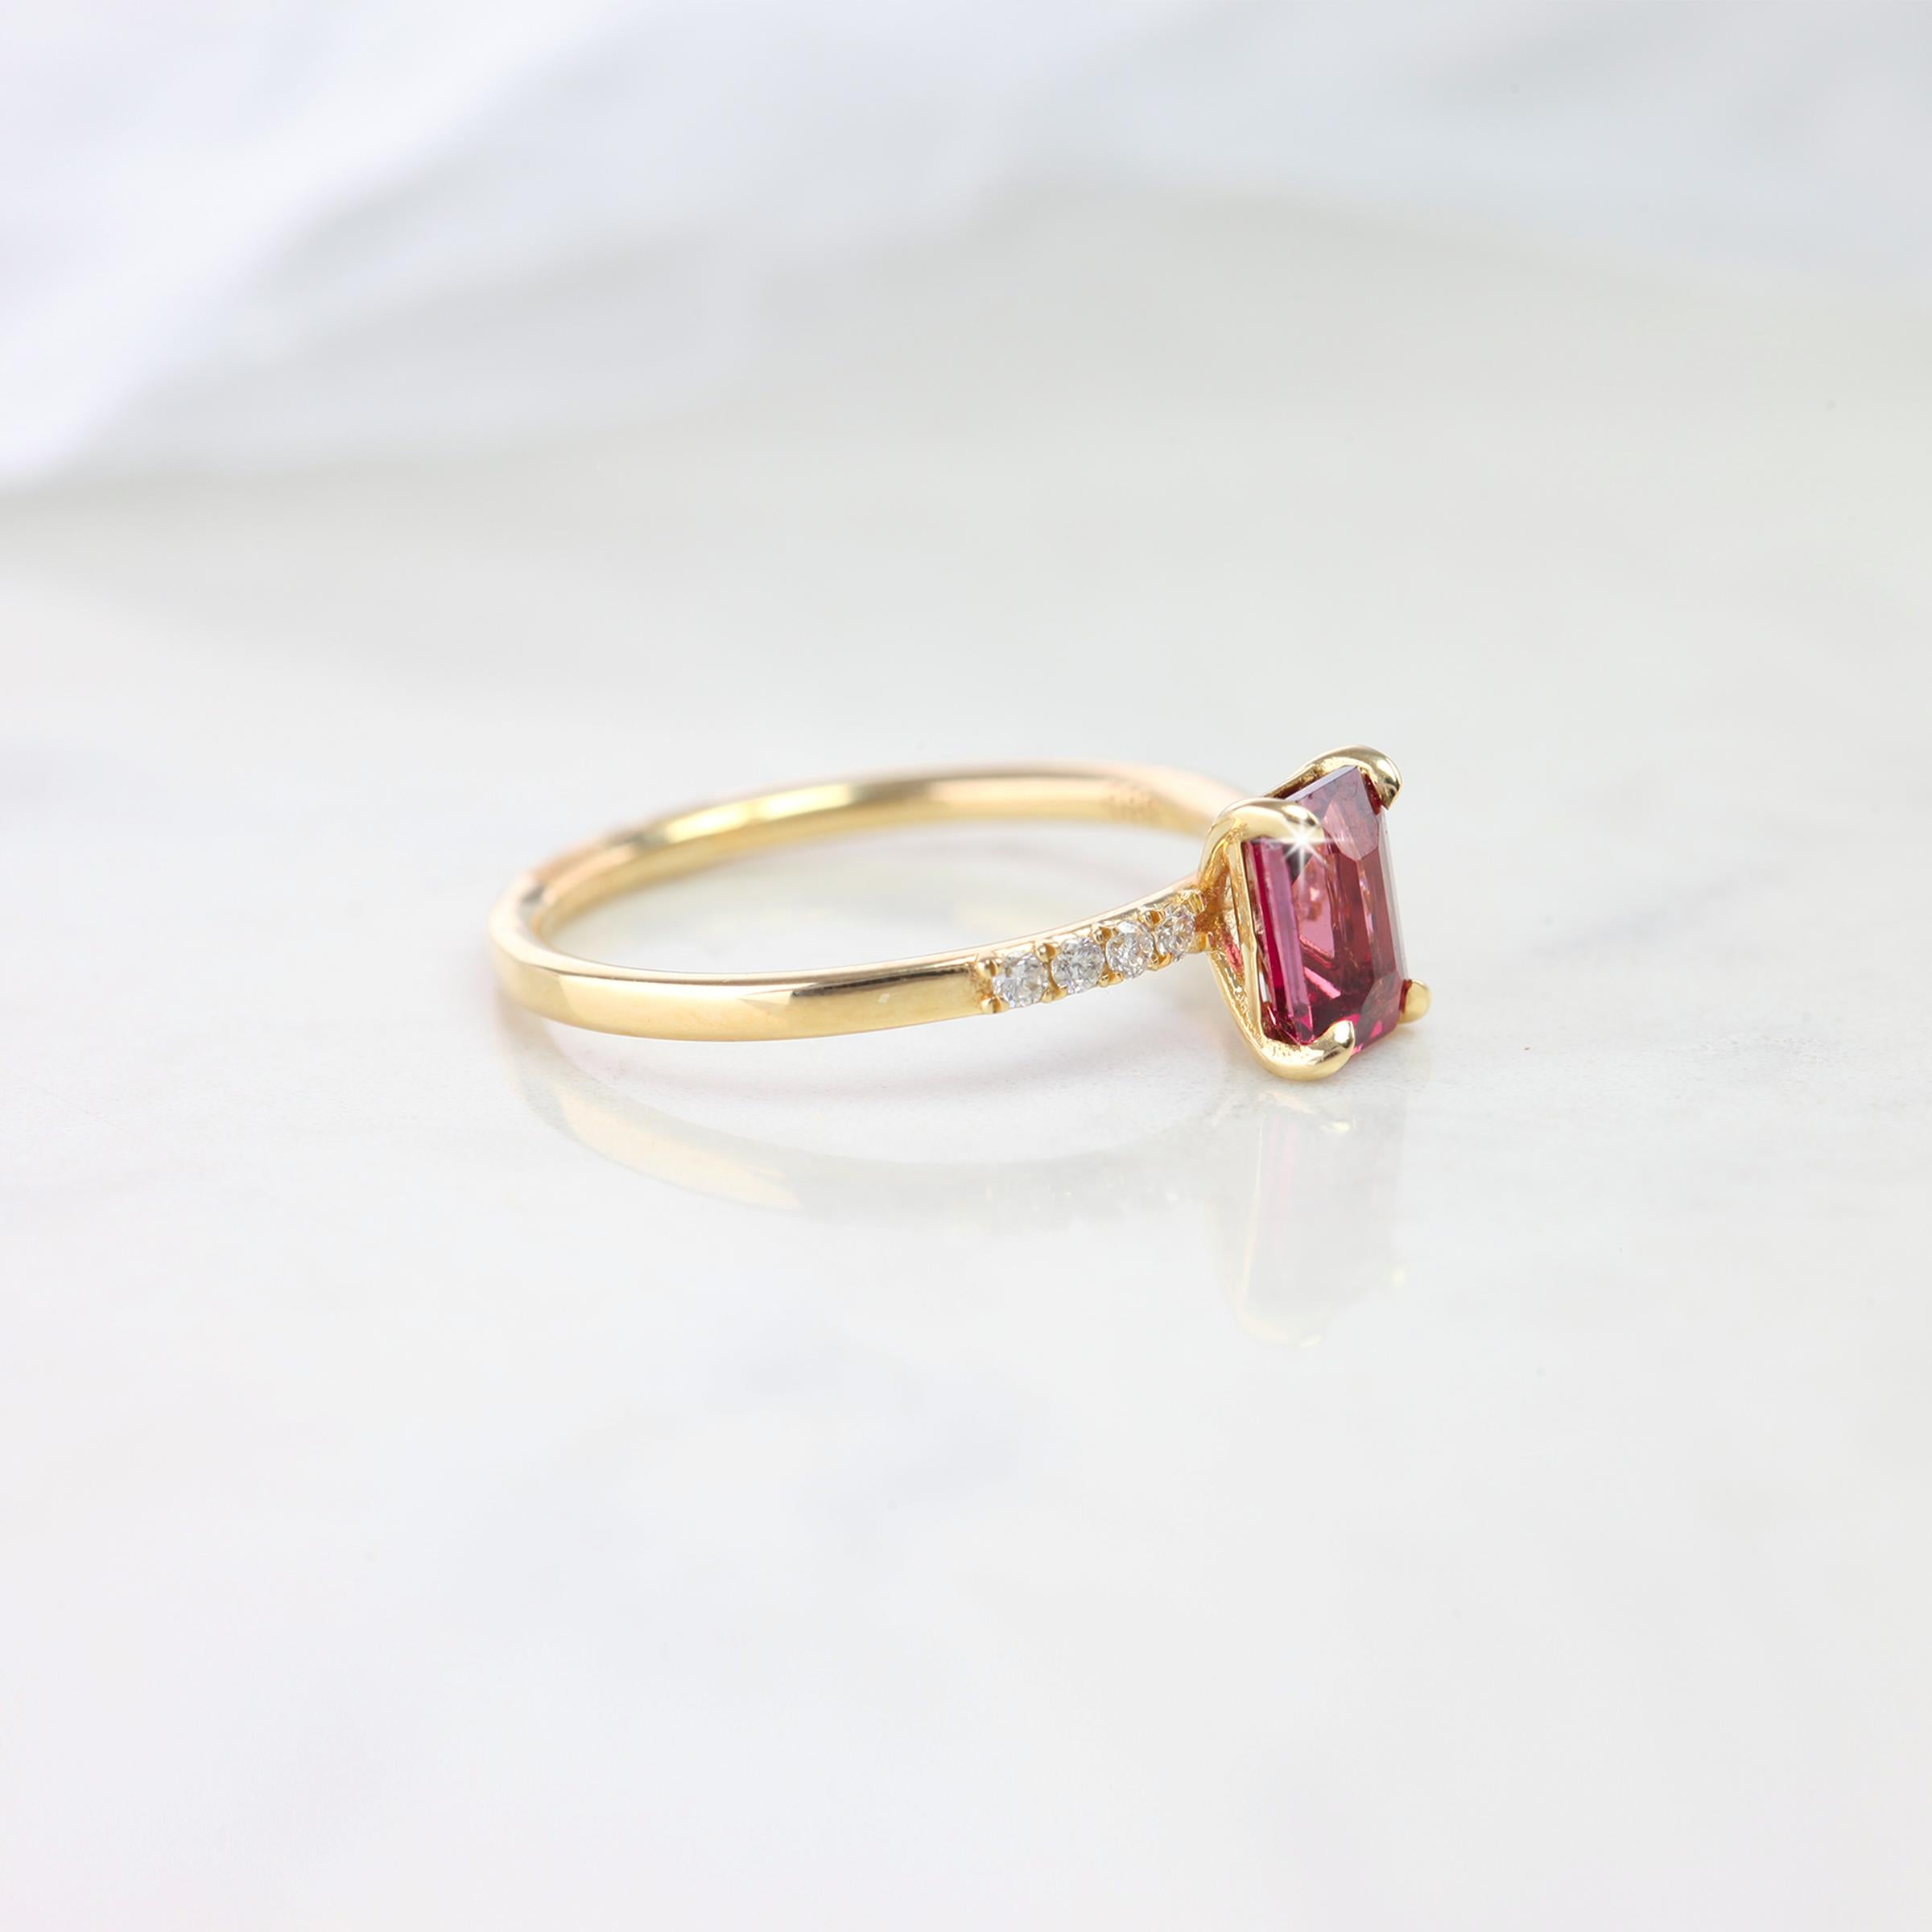 Pink Tourmaline Dainty Ring, Emerald Cut Pink Tourmaline Dainty Ring With Pave Diamond Setting created by hands from ring to the stone shapes. Good ideas of statement ring or stackable ring gift for her.

I used brillant diamonds pave setting to